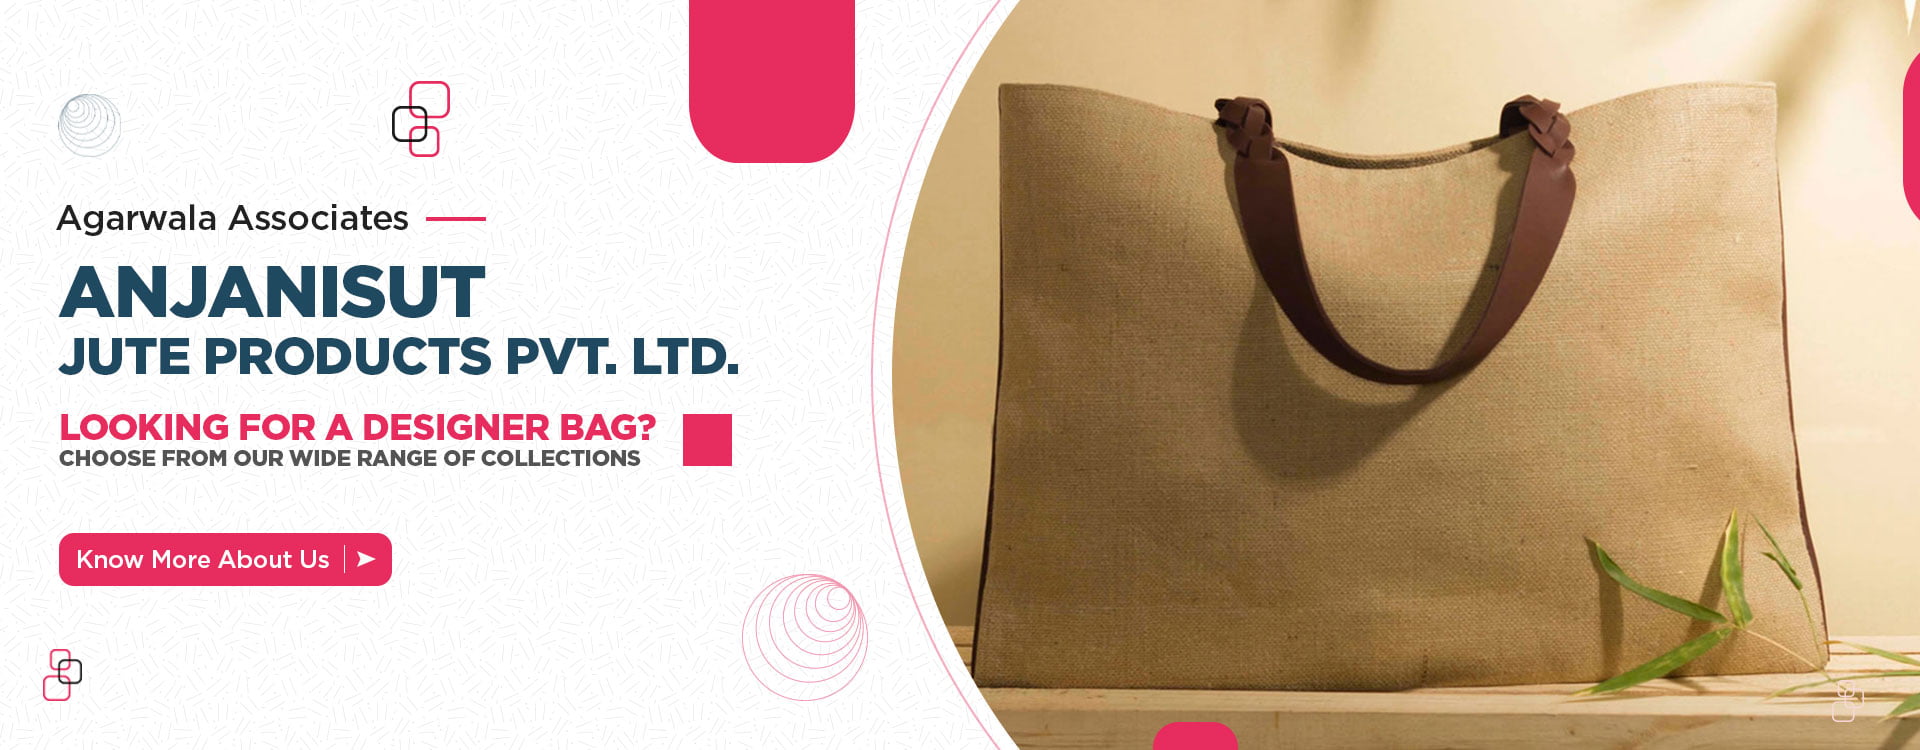 Anjanisut Jute Products Private Limited.